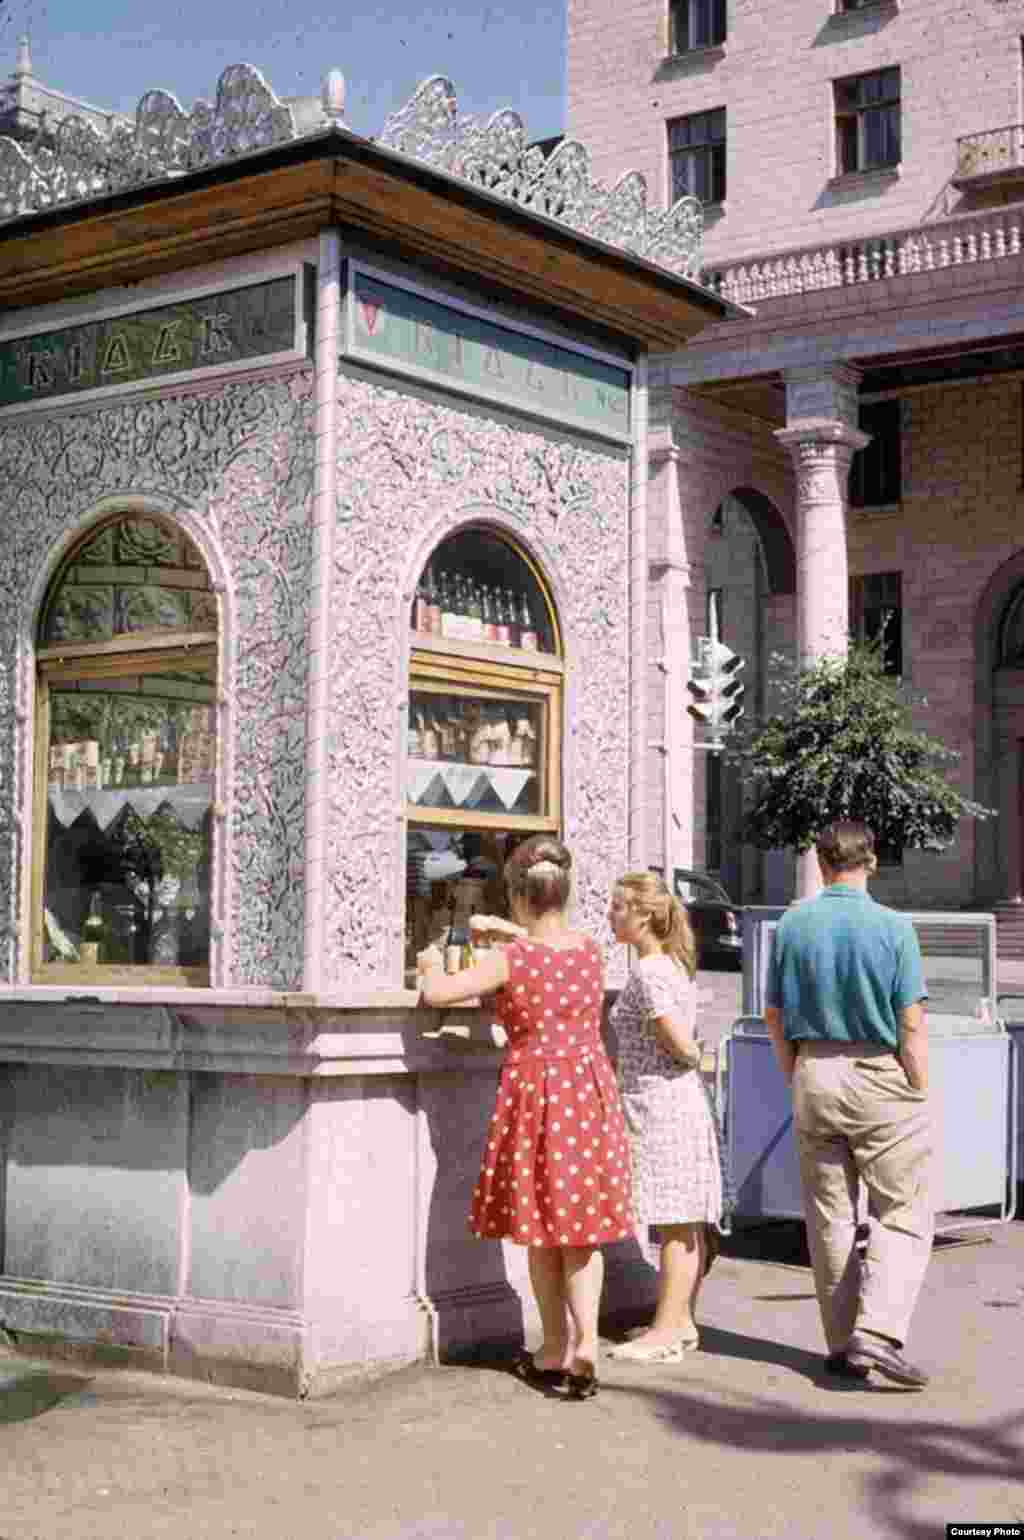 Kiosk No. 125 in Kyiv used to sell beverages and also alcoholic drinks and cigarettes. The kiosk is still there but looks rather different today.